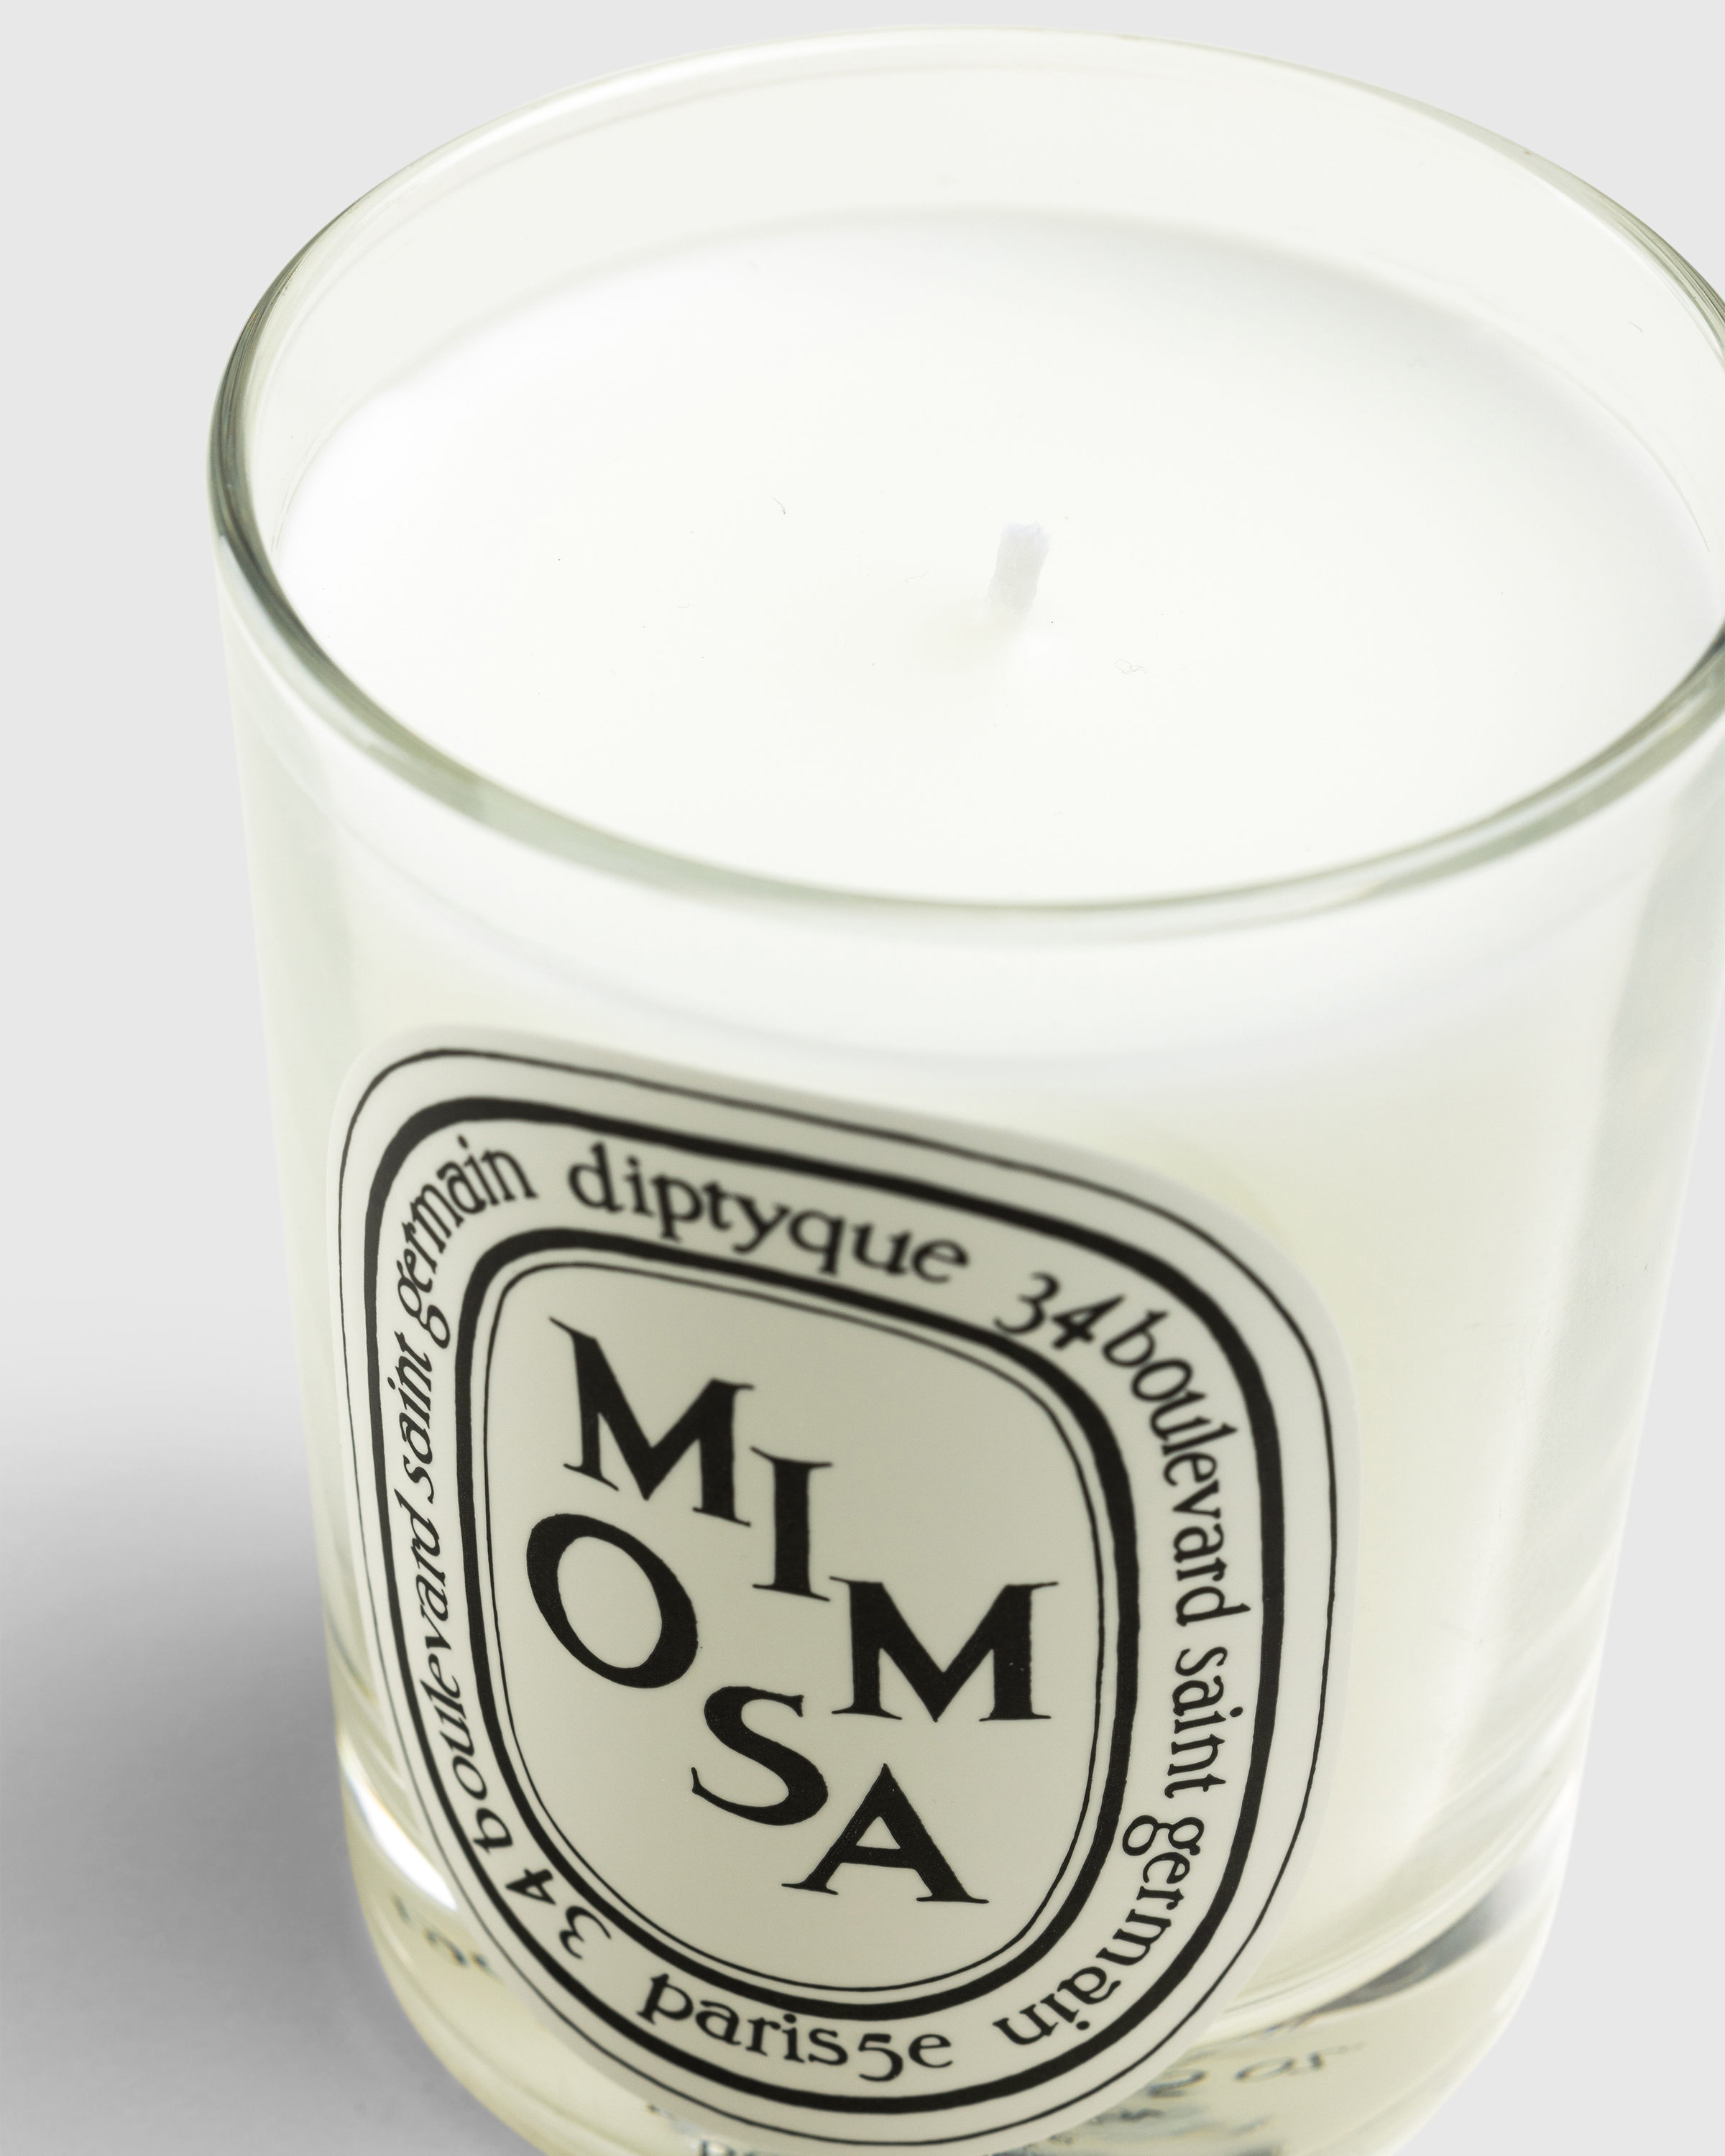 Diptyque – Standard Candle Mimosa 190g - Candles & Fragrances - White - Image 2